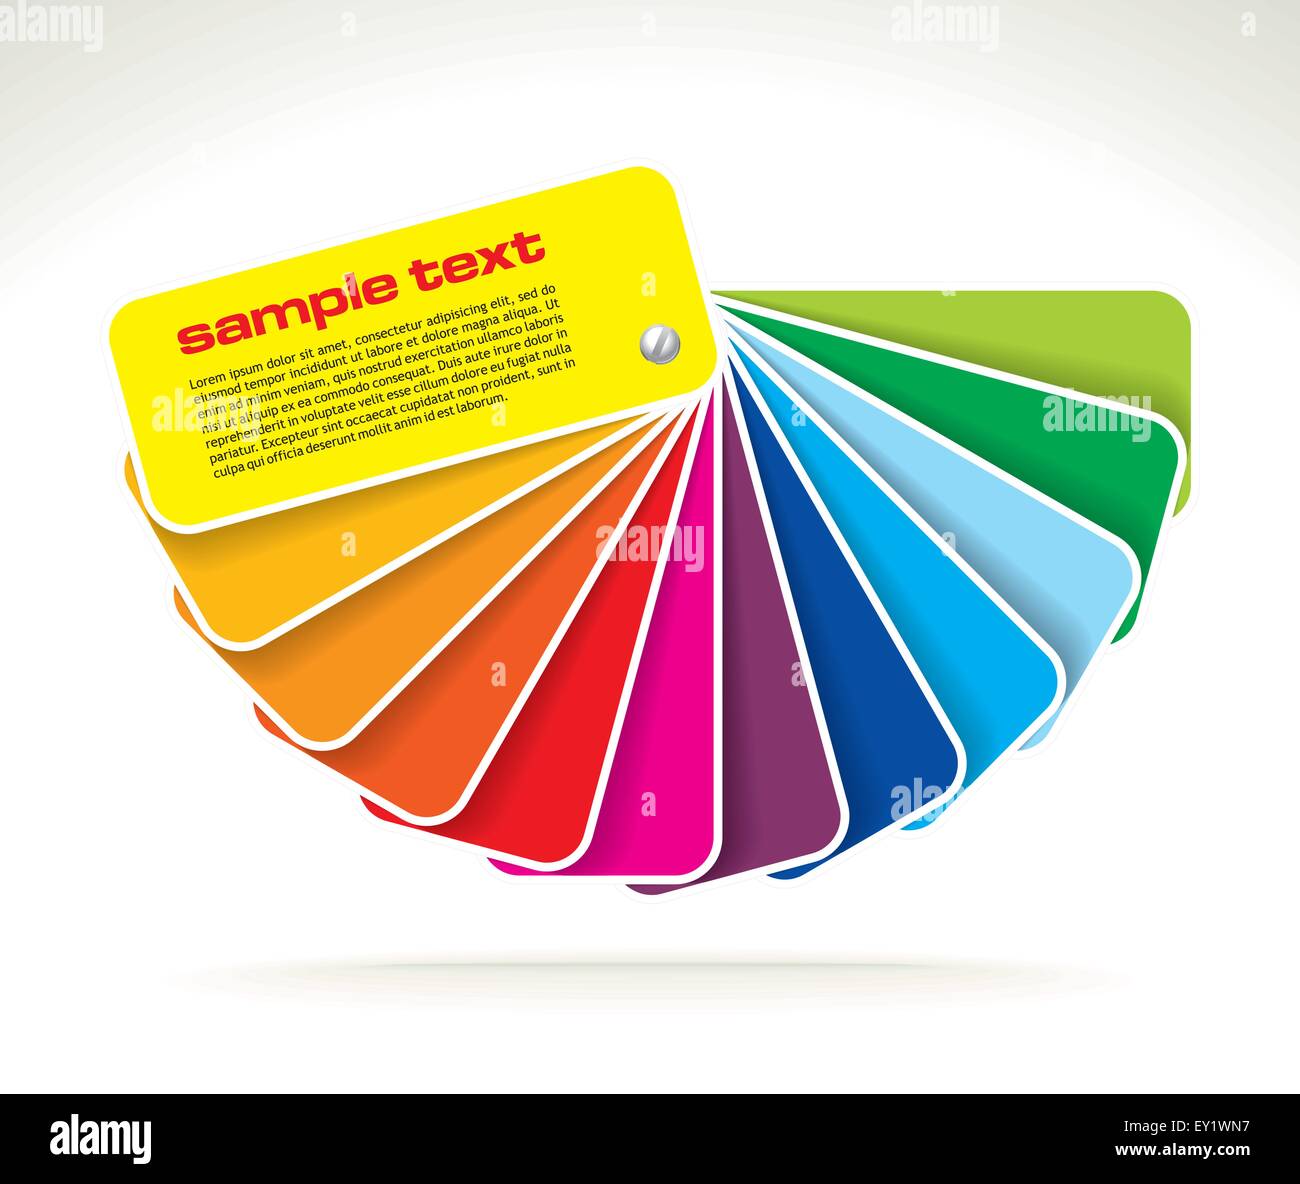 colour guide with sample text - vector illustration Stock Vector